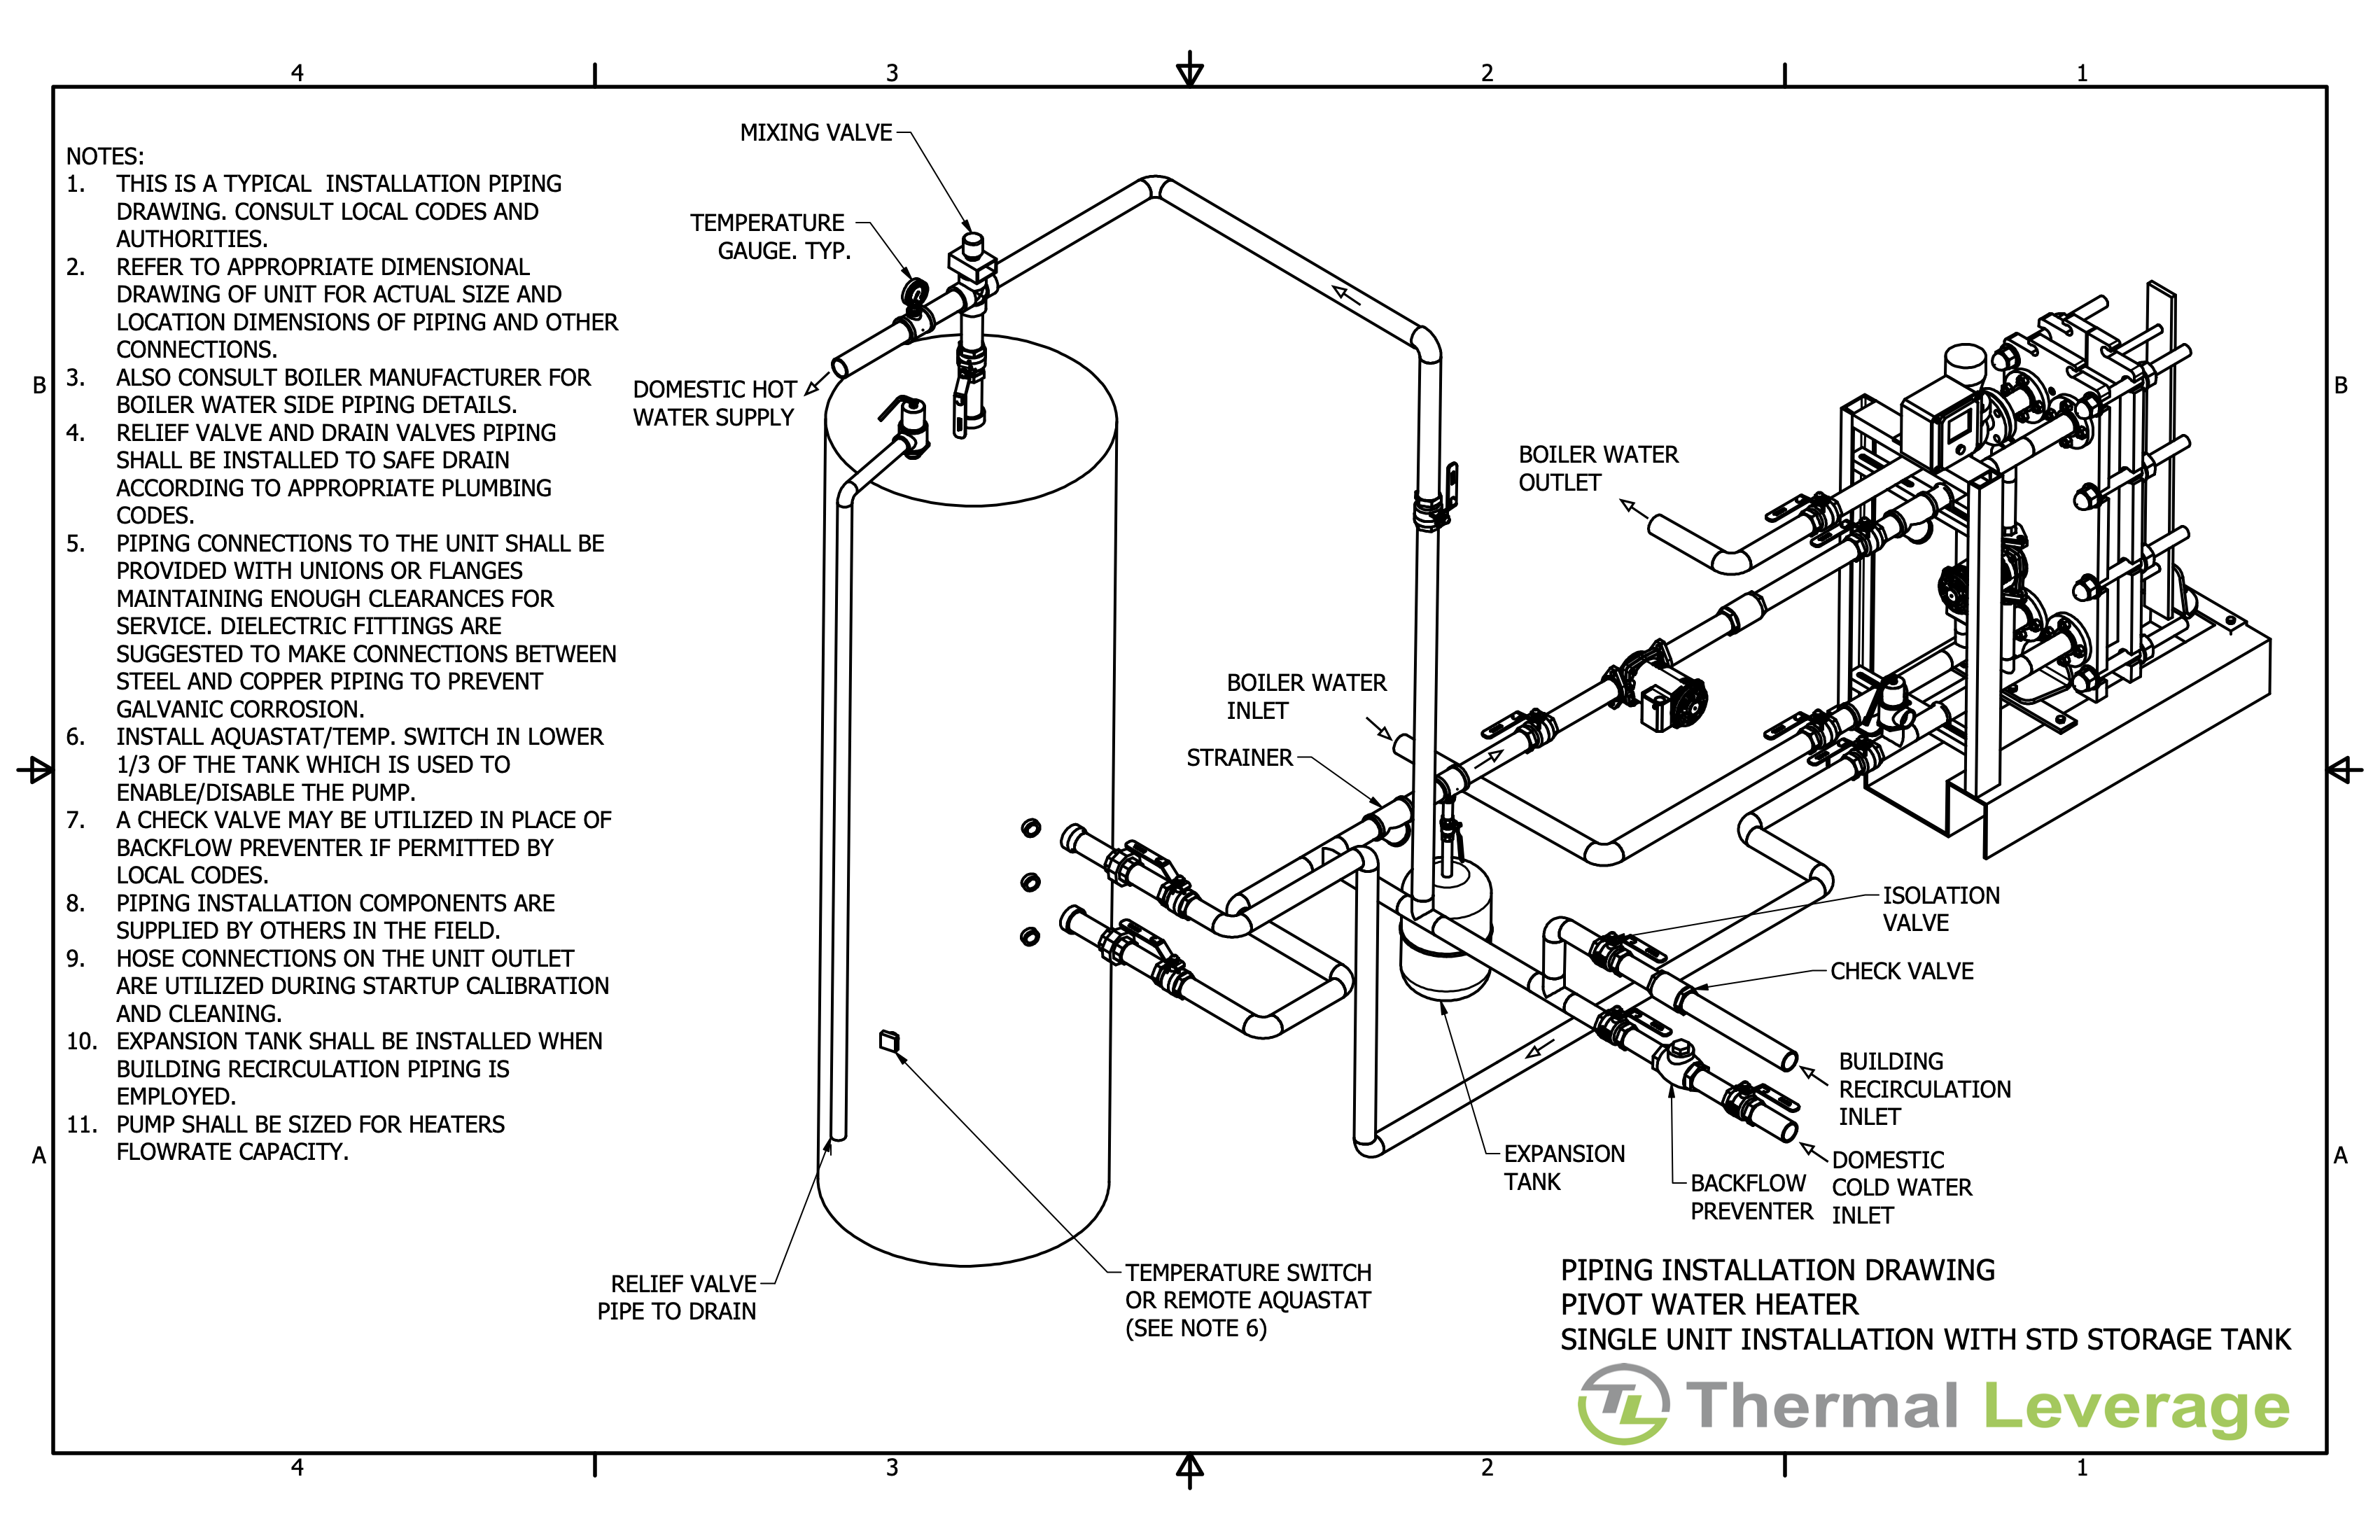 PIPING-INSTALL-DRAWING-PIVOT-WATER-HEATER-SINGLE-UNIT-INSTALL-WITH-STD-STORAGE-TANK.png